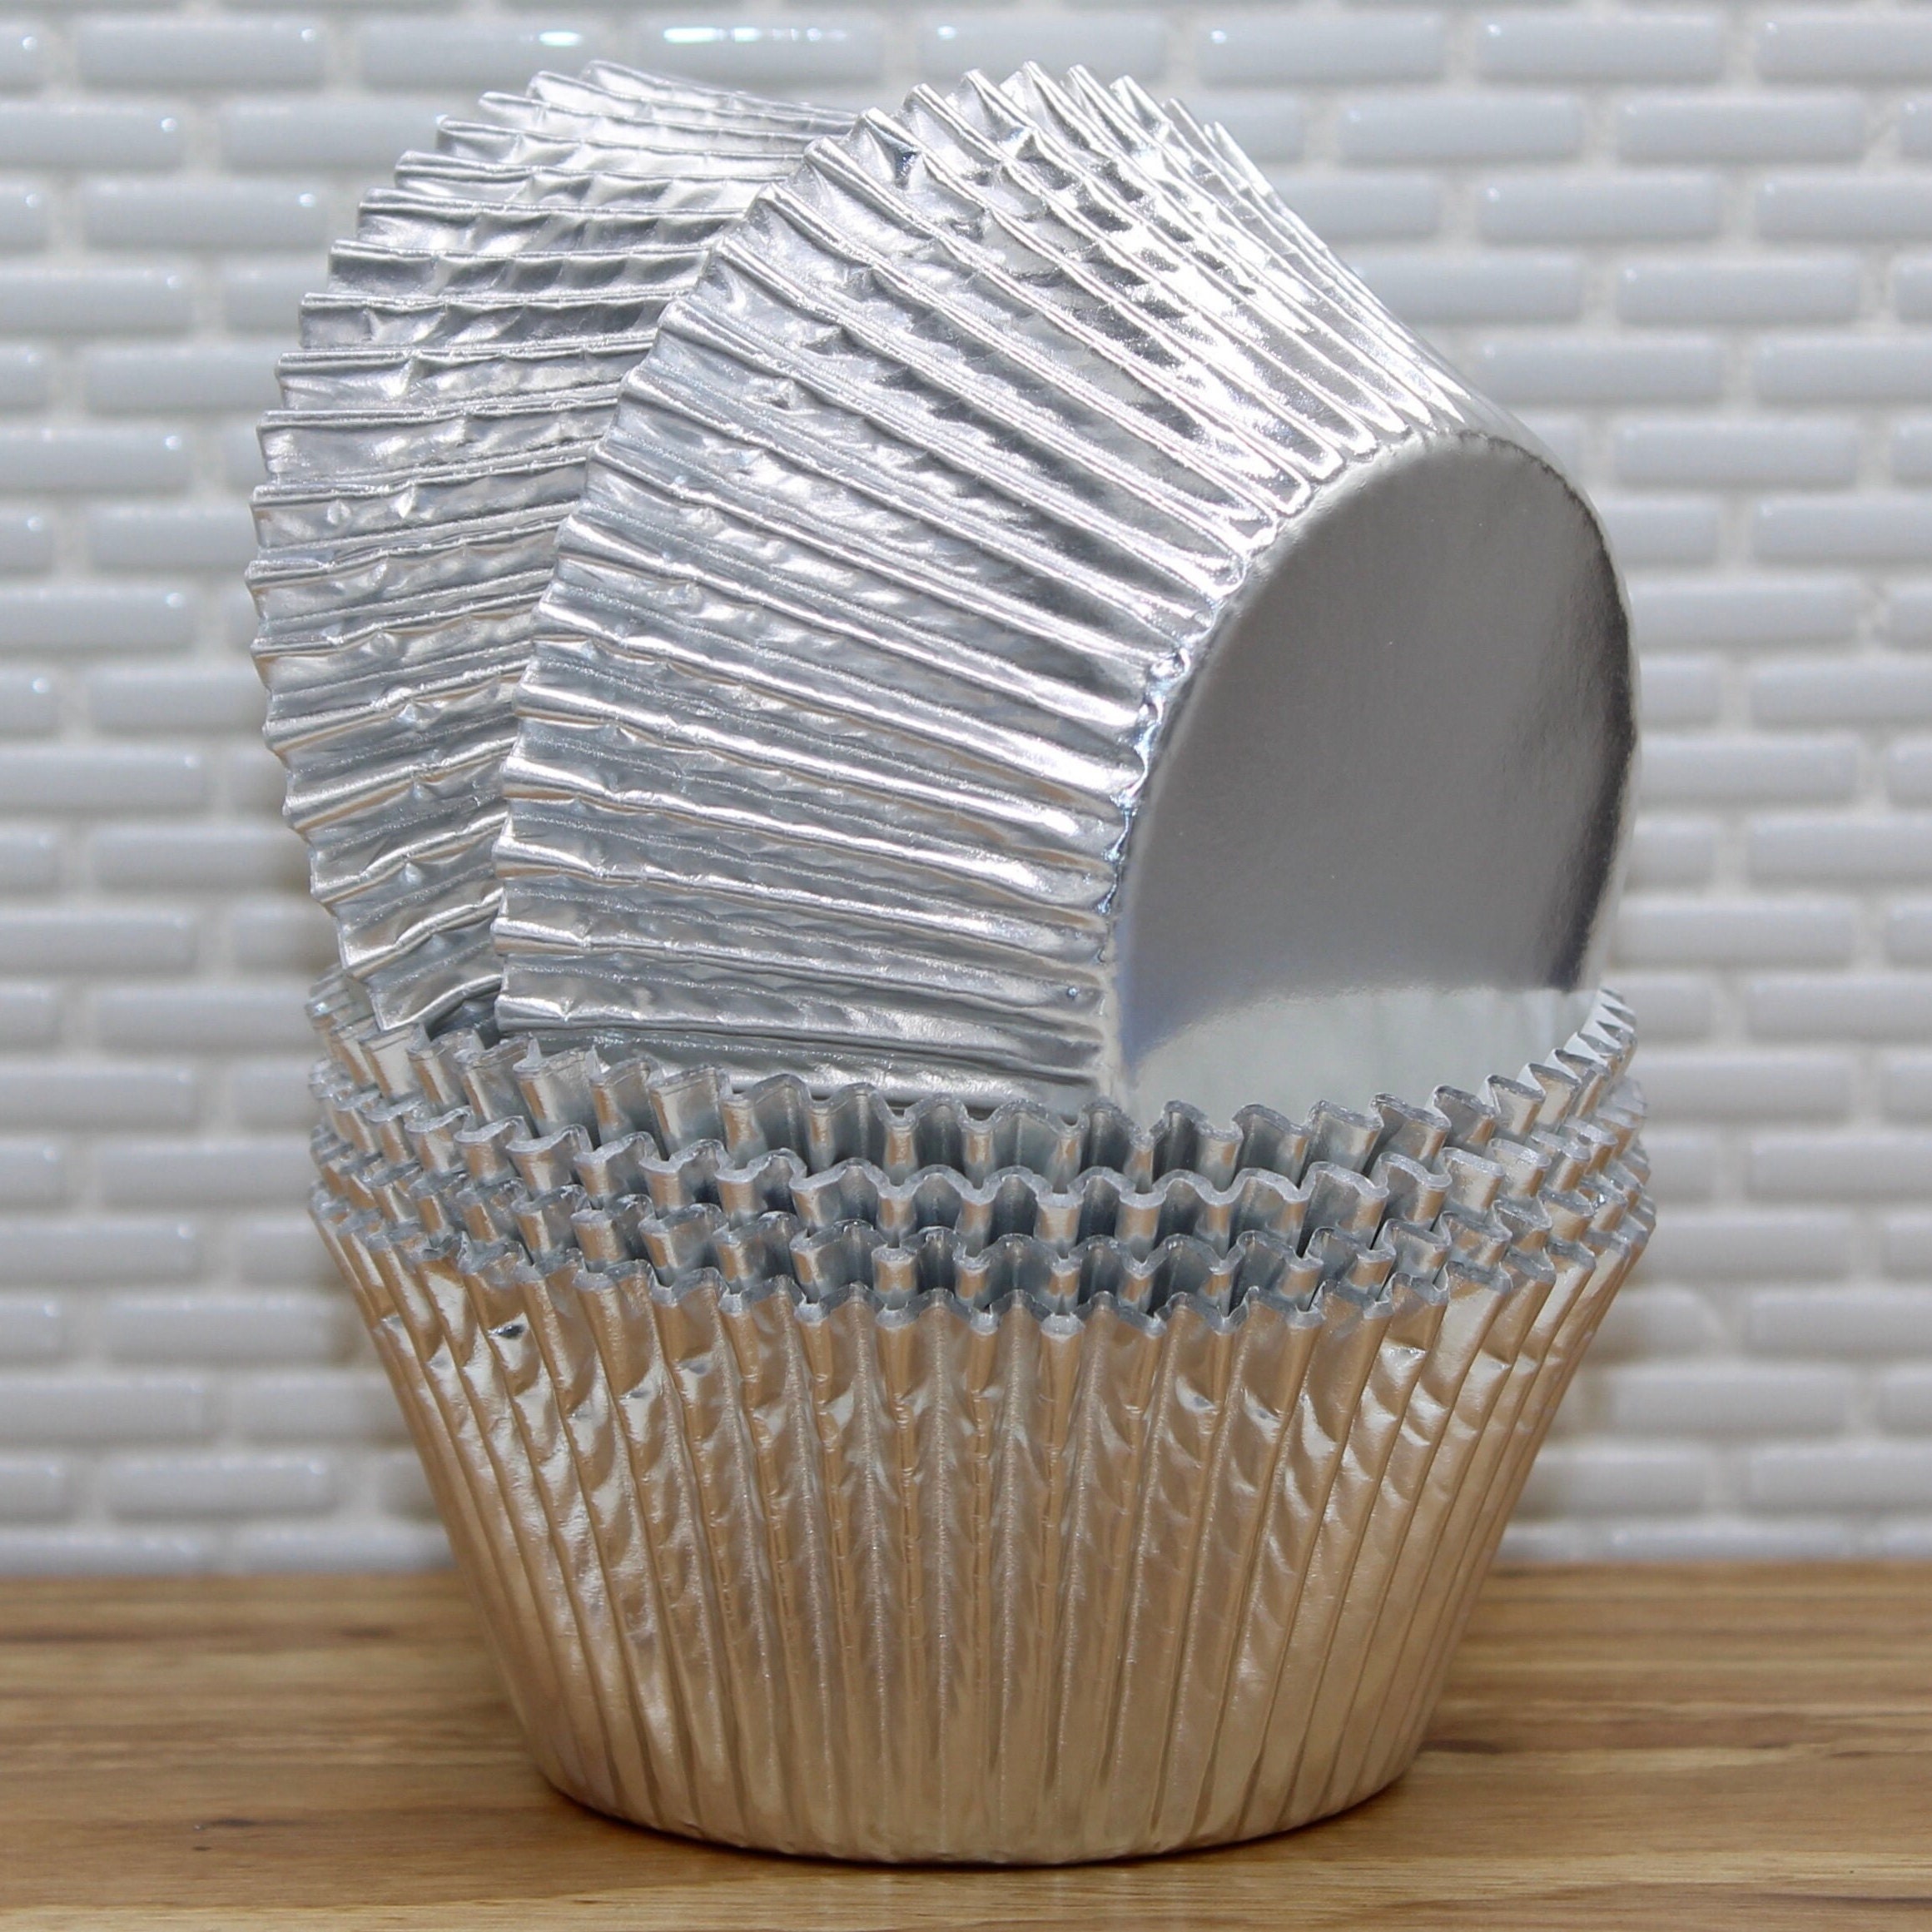 Jumbo Silver Foil Cupcake Liners qty 30 Jumbo Silver Baking Cup, Jumbo  Silver Greaseproof Muffin Cups, Jumbo Silver Cupcake Wrappers 